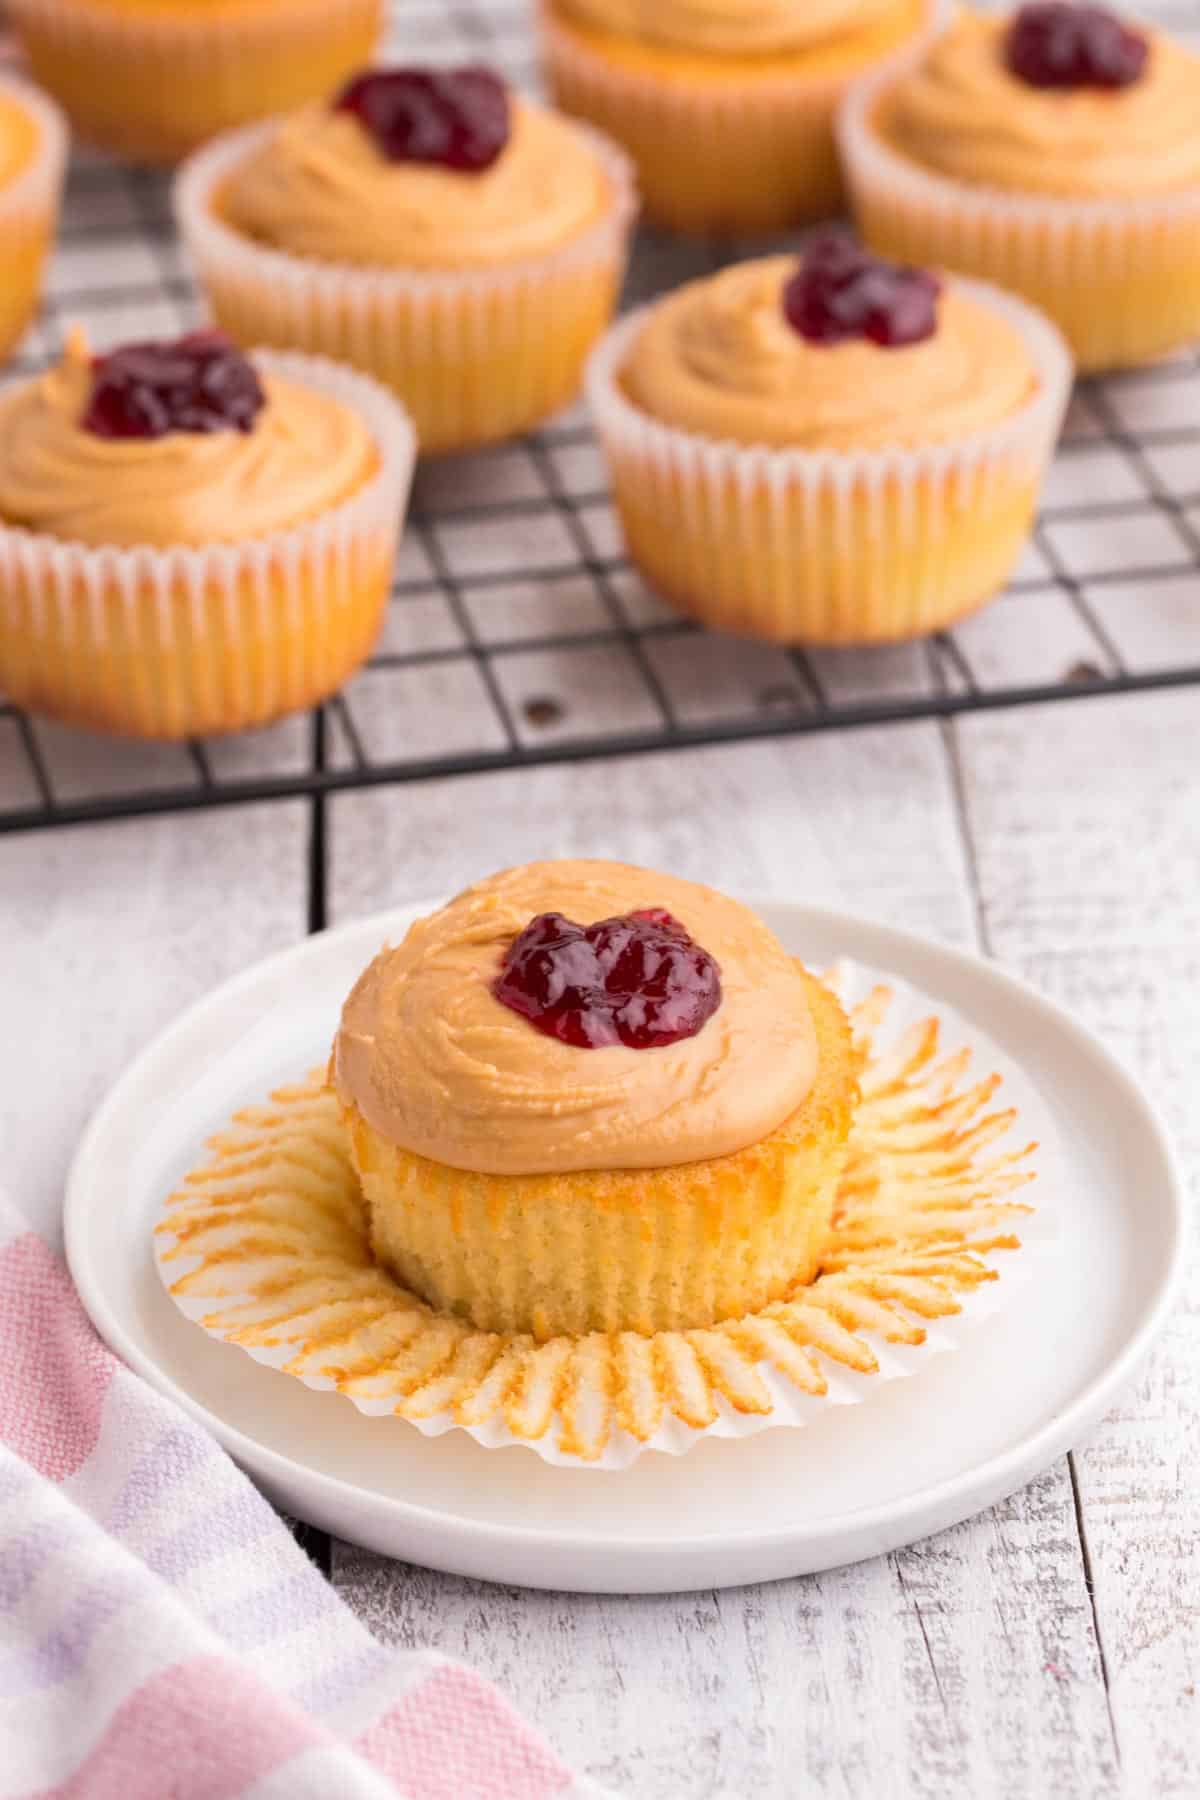 gluten free peanut butter and jelly cupcake on a white plate with the wrapper peeled off and more cupcakes on a rack behind it